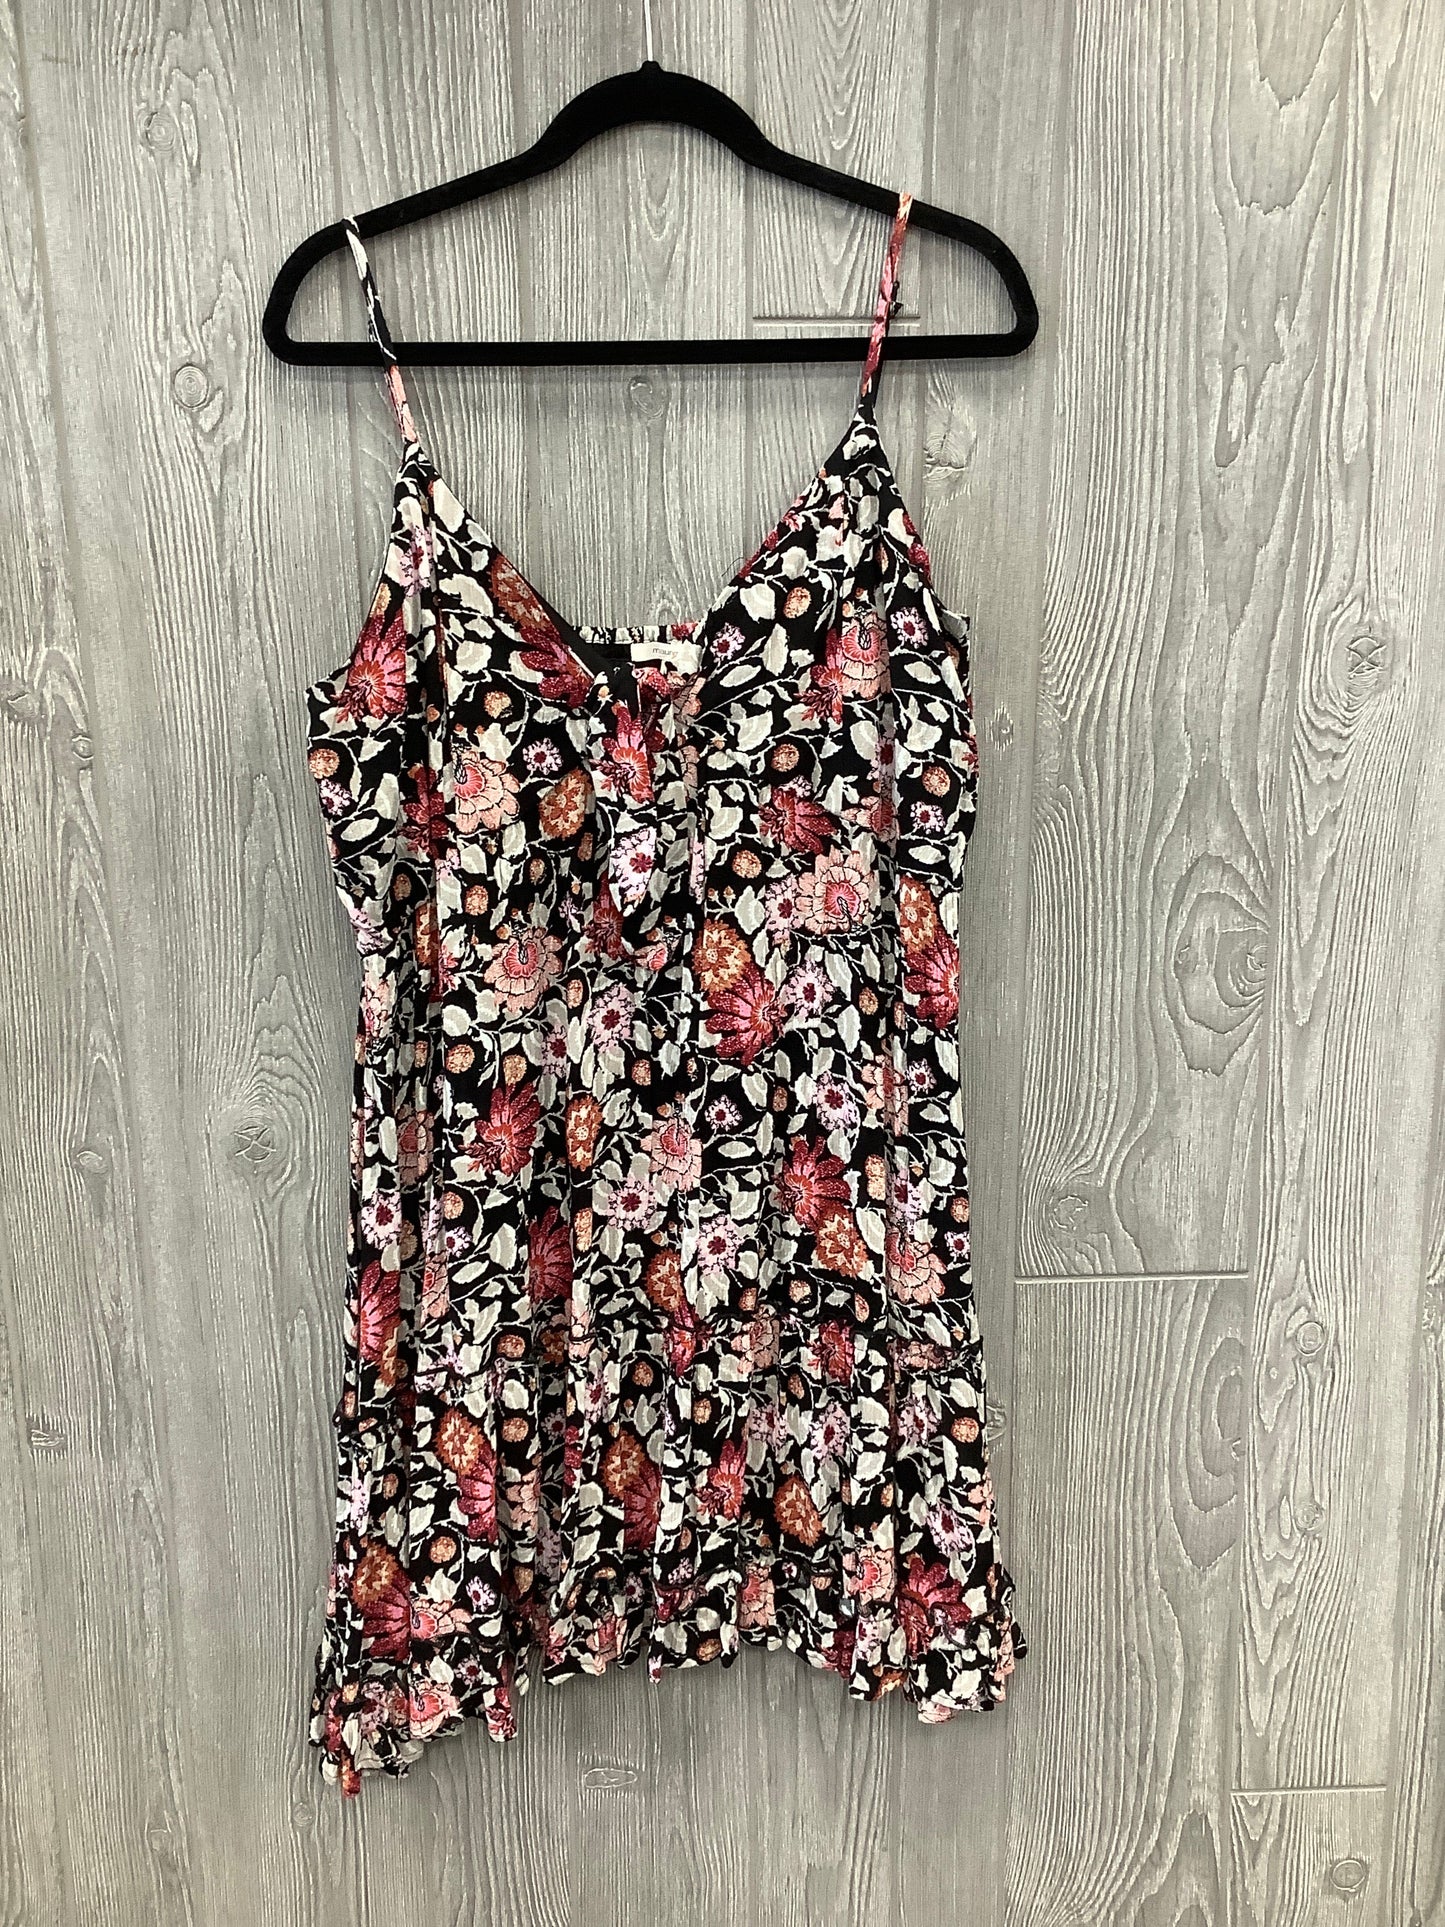 Floral Print Dress Casual Midi Maurices, Size Xl